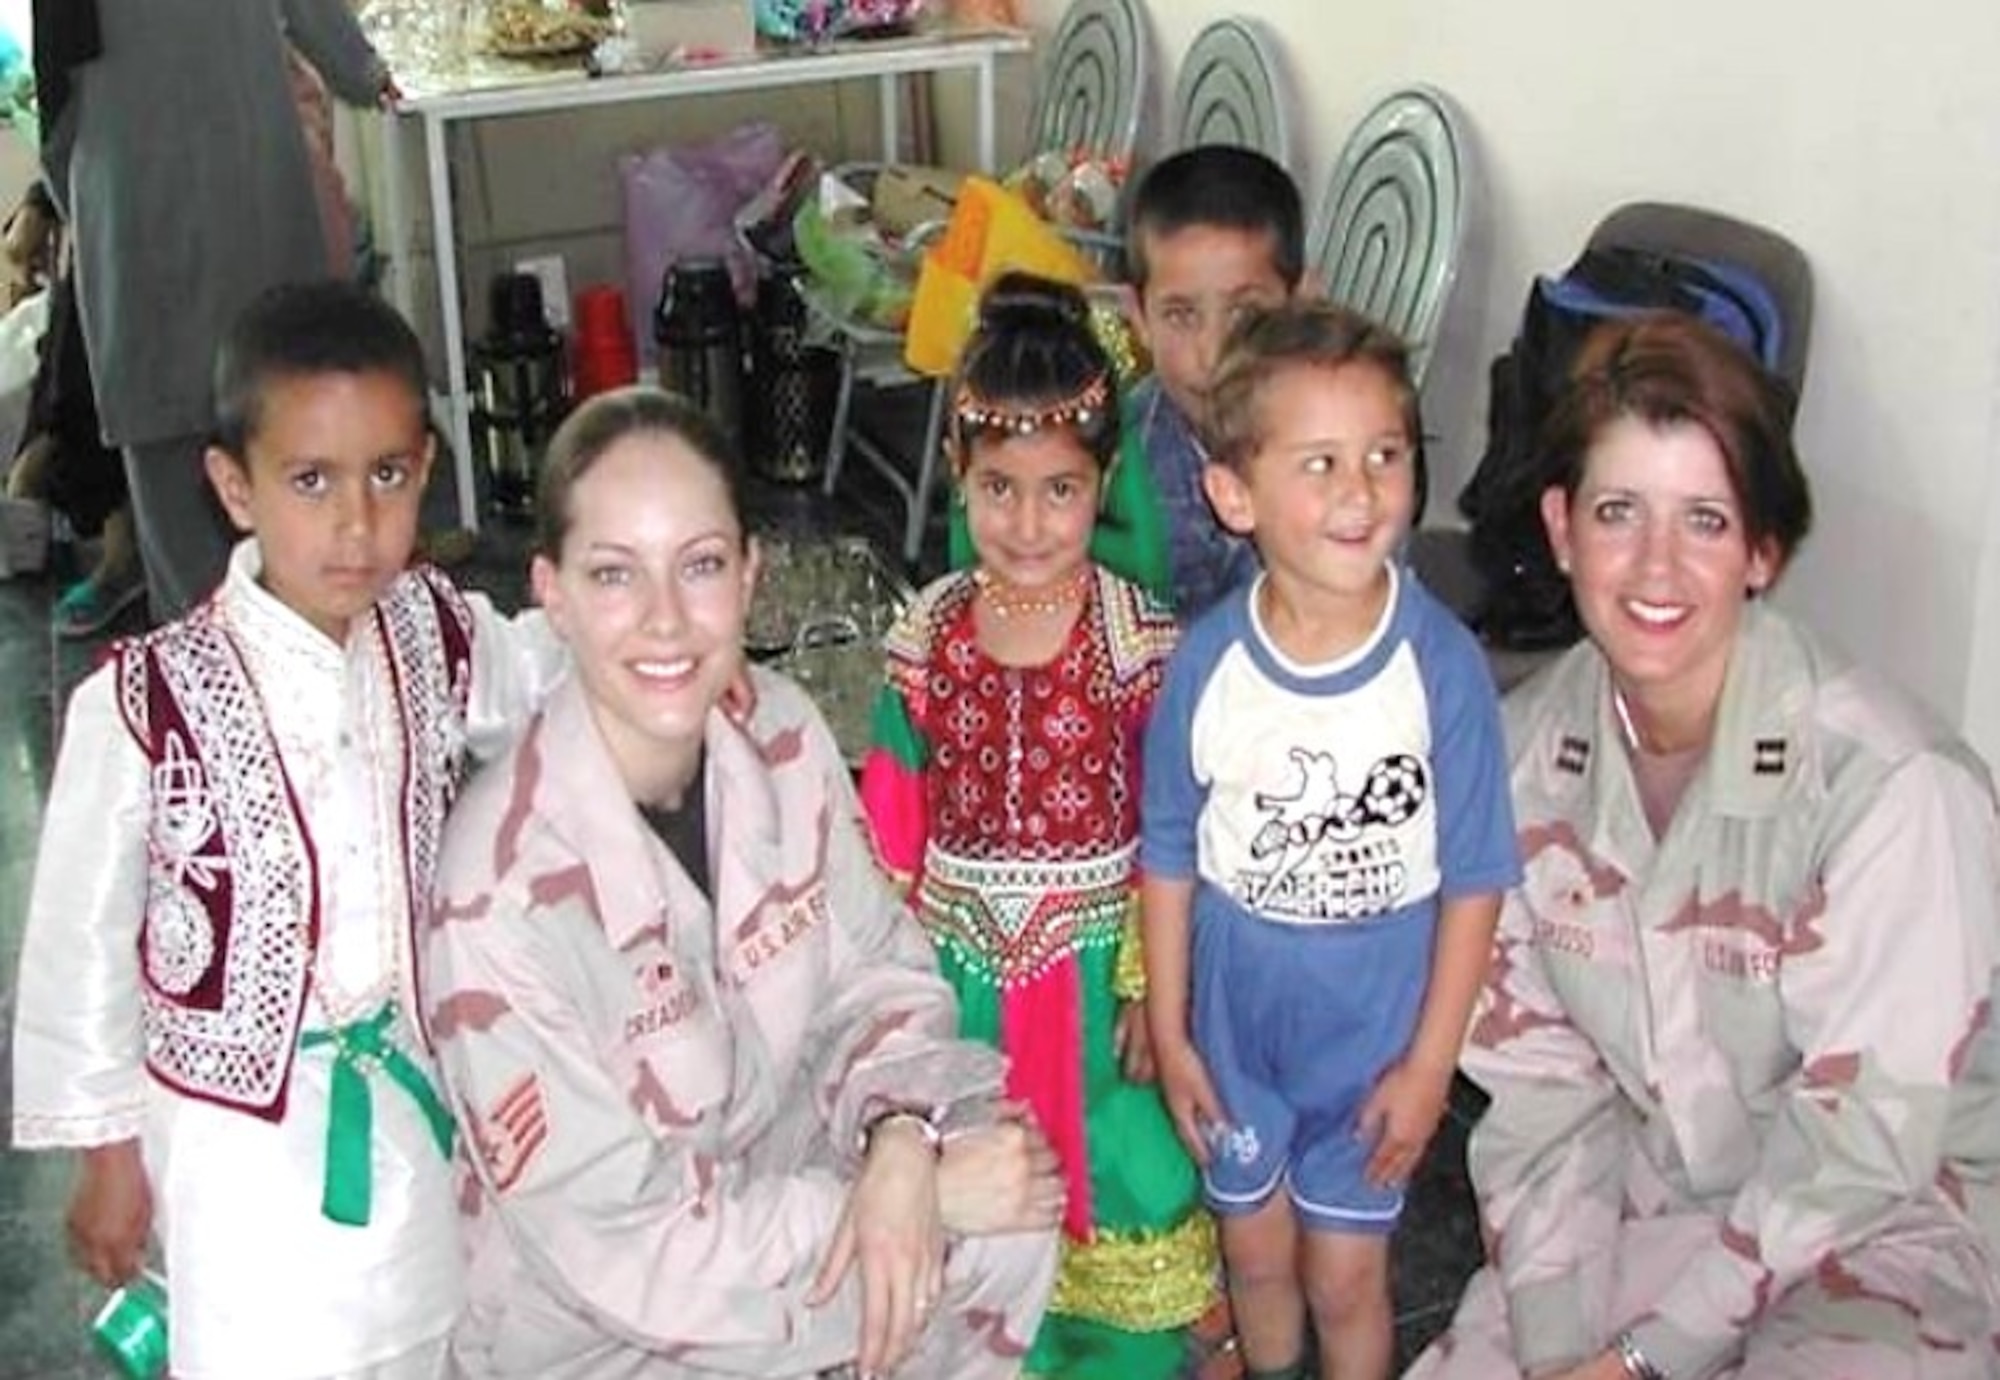 Then Staff Sgt., now Maj. Debora Berg (left), current 436th Contracting Squadron commander, and then Capt. Renee Russo (right), current 436th CONS director of business operations, worked with local children from the International School of Kabul in Kabul, Afghanistan during their  2006 deployment. Russo served as Berg’s commanding officer in 2006. Today, their roles are reversed, as Berg oversees the unit. (Courtesy photo)